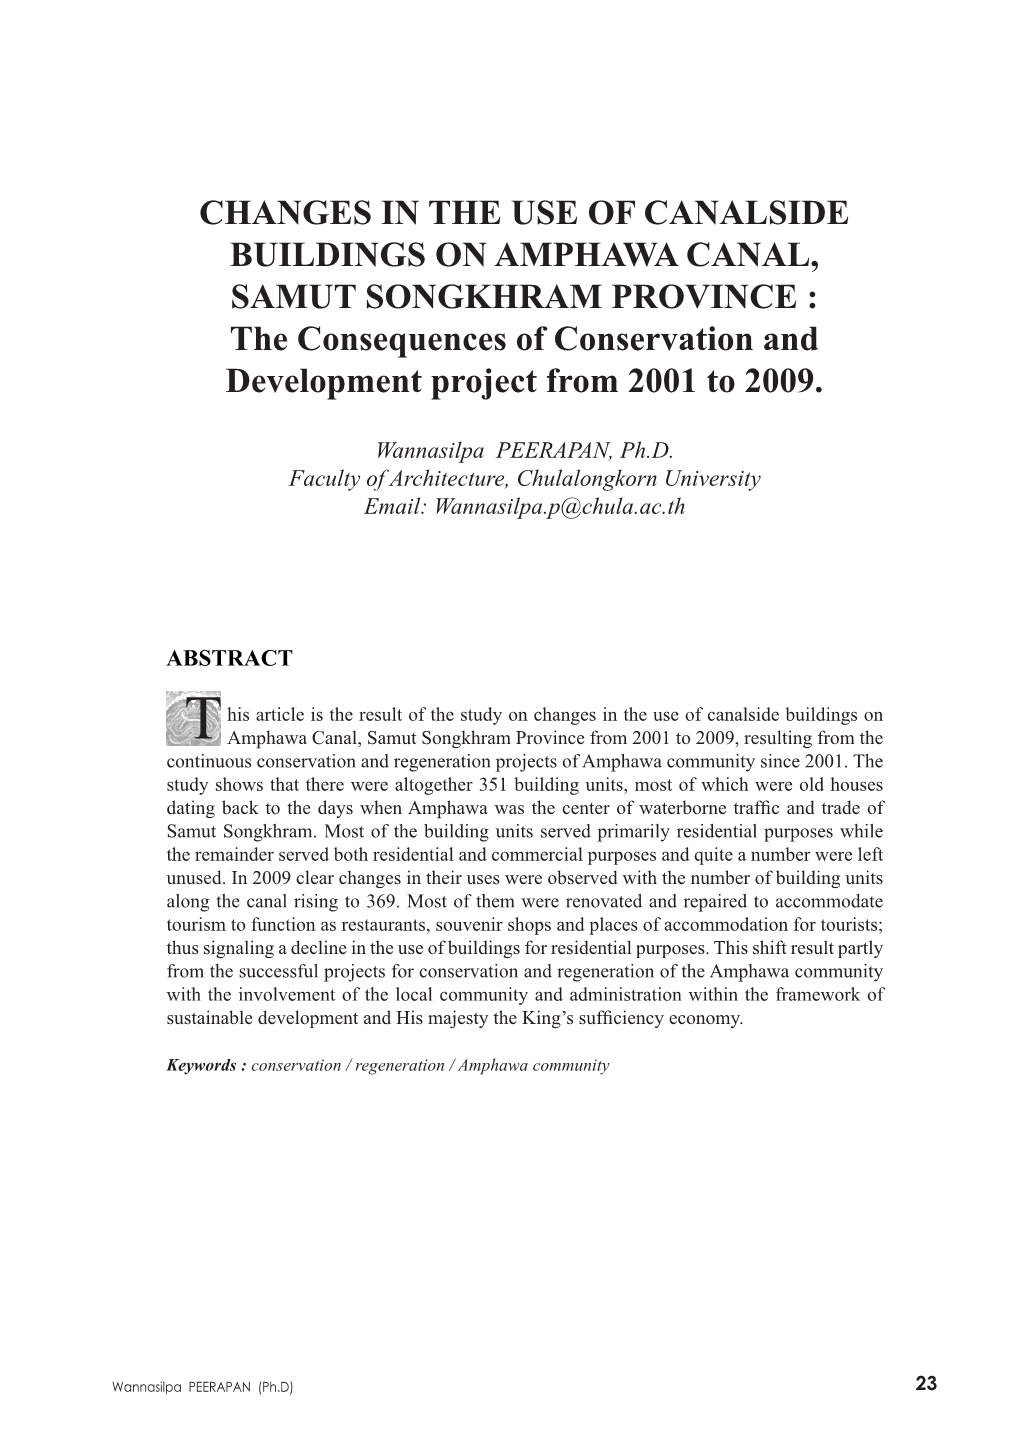 CHANGES in the USE of CANALSIDE BUILDINGS on AMPHAWA CANAL, SAMUT SONGKHRAM PROVINCE : the Consequences of Conservation and Development Project from 2001 to 2009